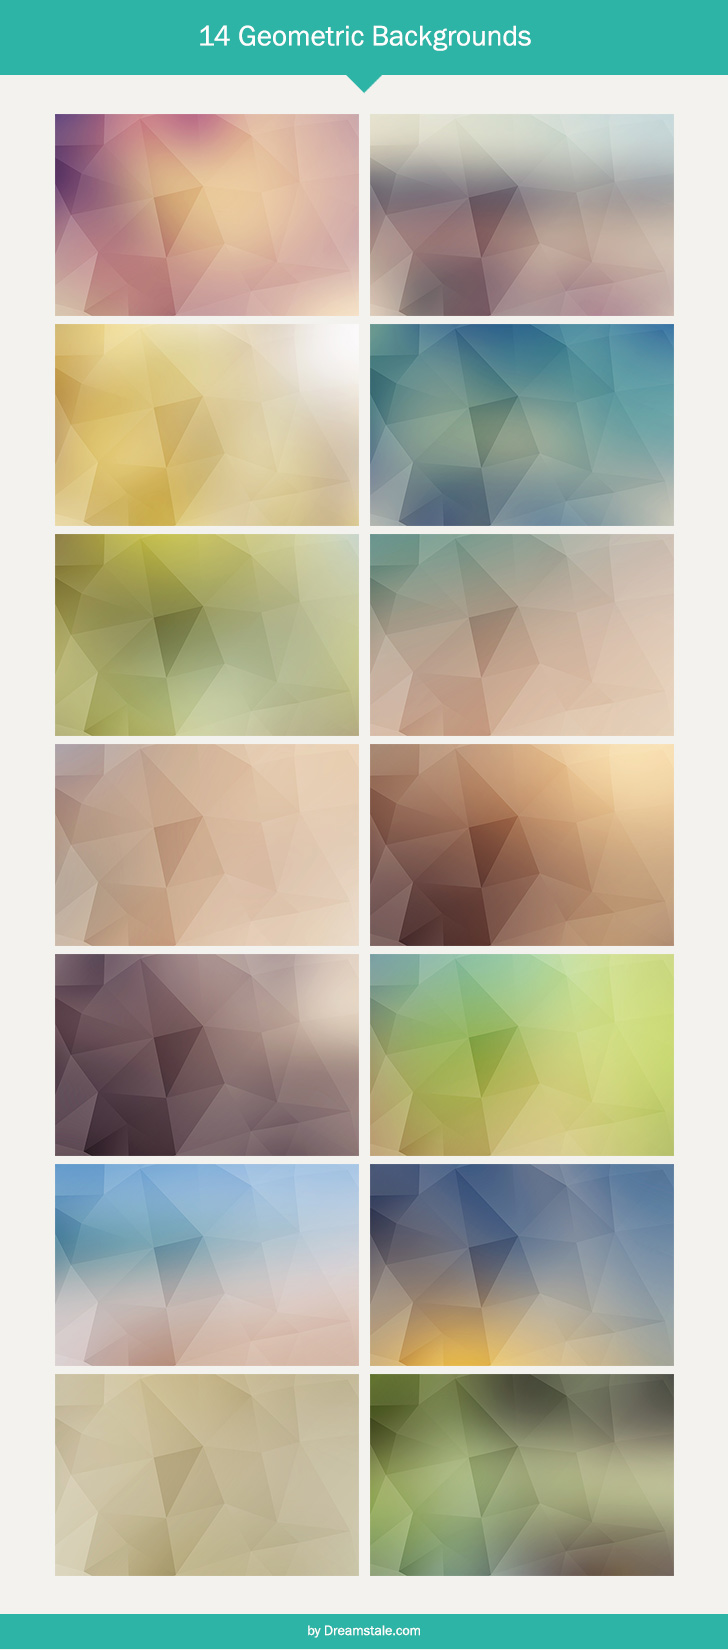 freebies free downloads download freebies free backgrounds download stock images Free stock images geometric backgrounds web resources free wallpapers free files stock images download wallpapers resources dreamstale